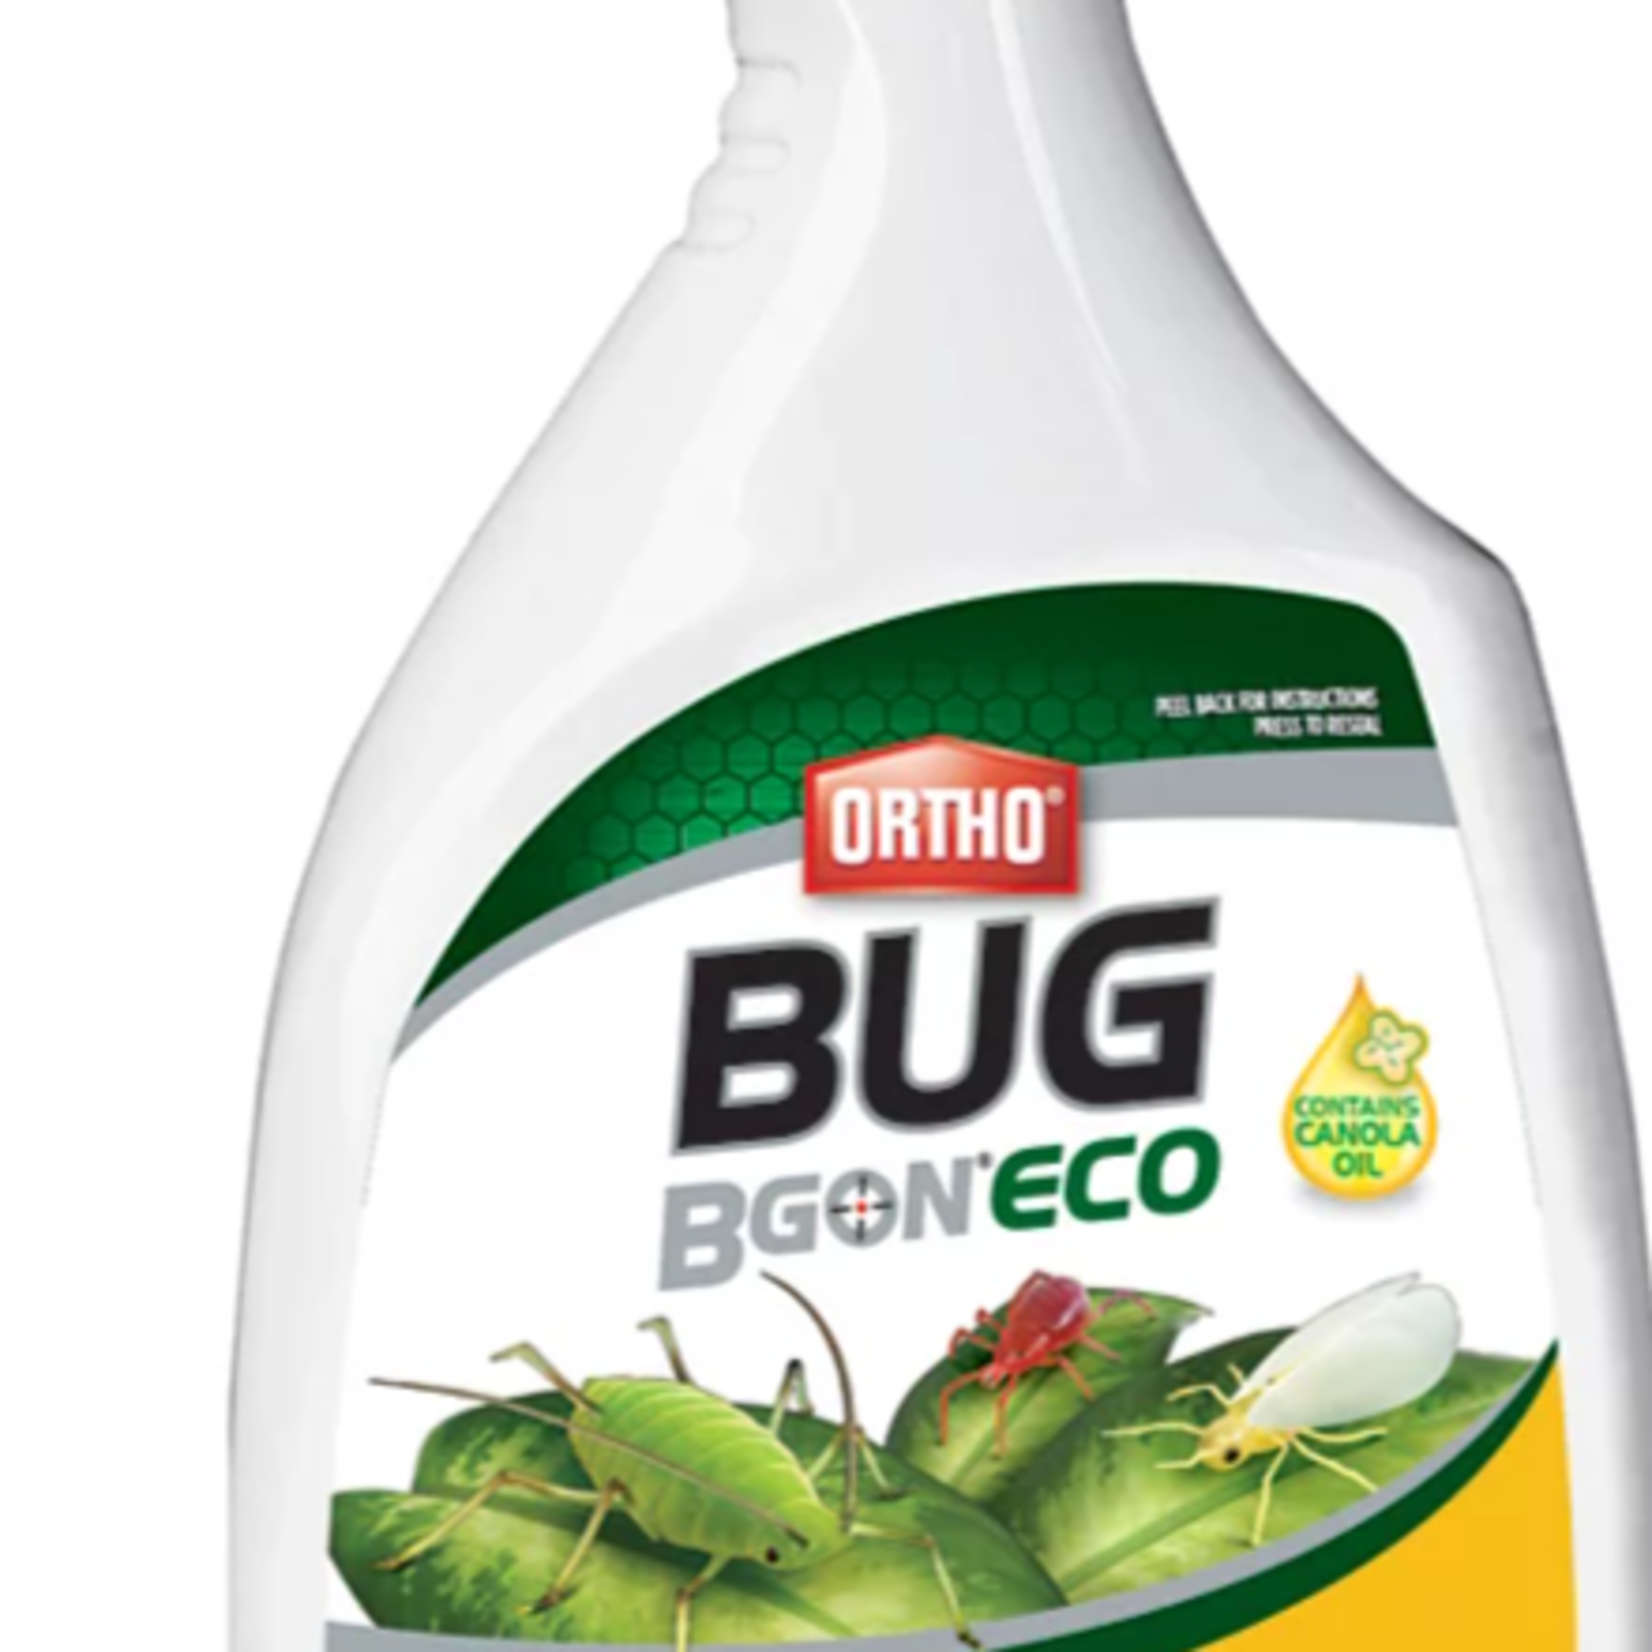 Ortho Bug B Gon ECO Ready-To-Use 1L Insecticide